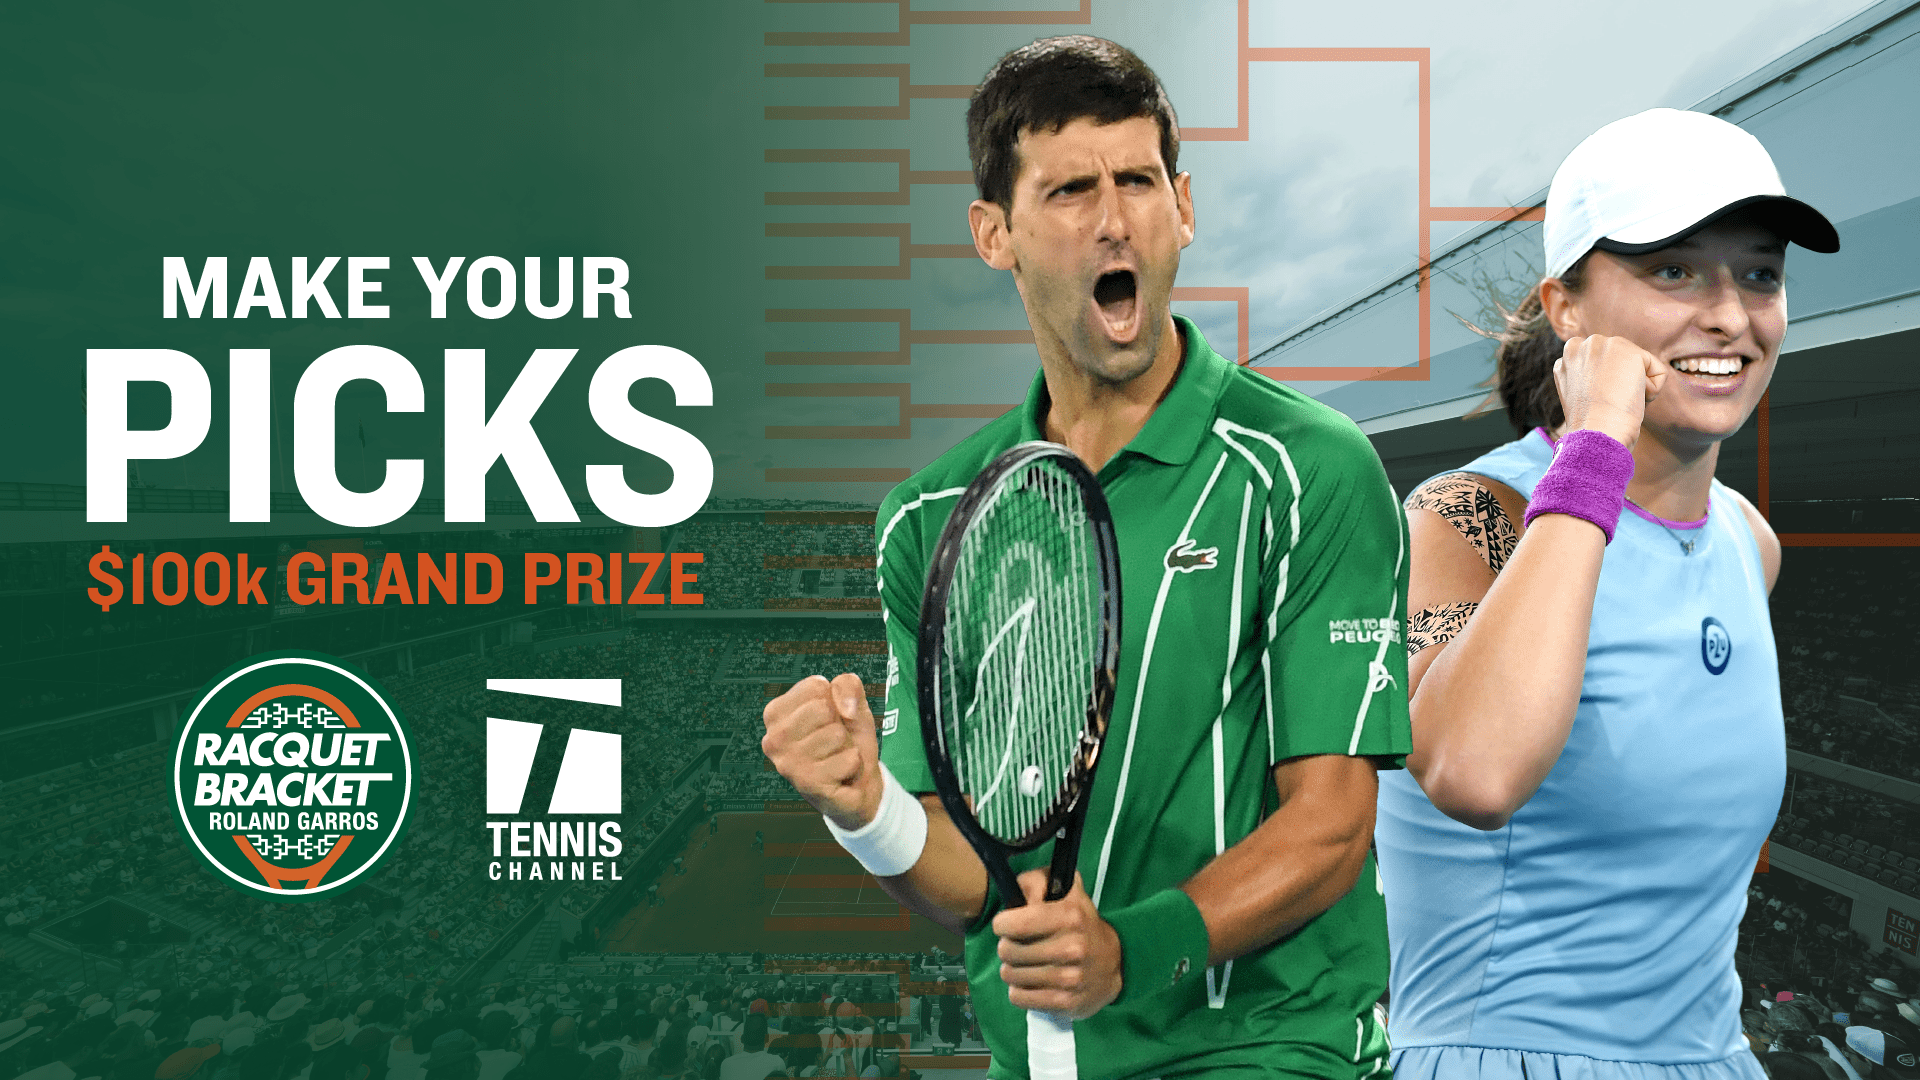 Racquet Bracket, Roland Garros edition $100,000 worth of prizes is up for grabs!